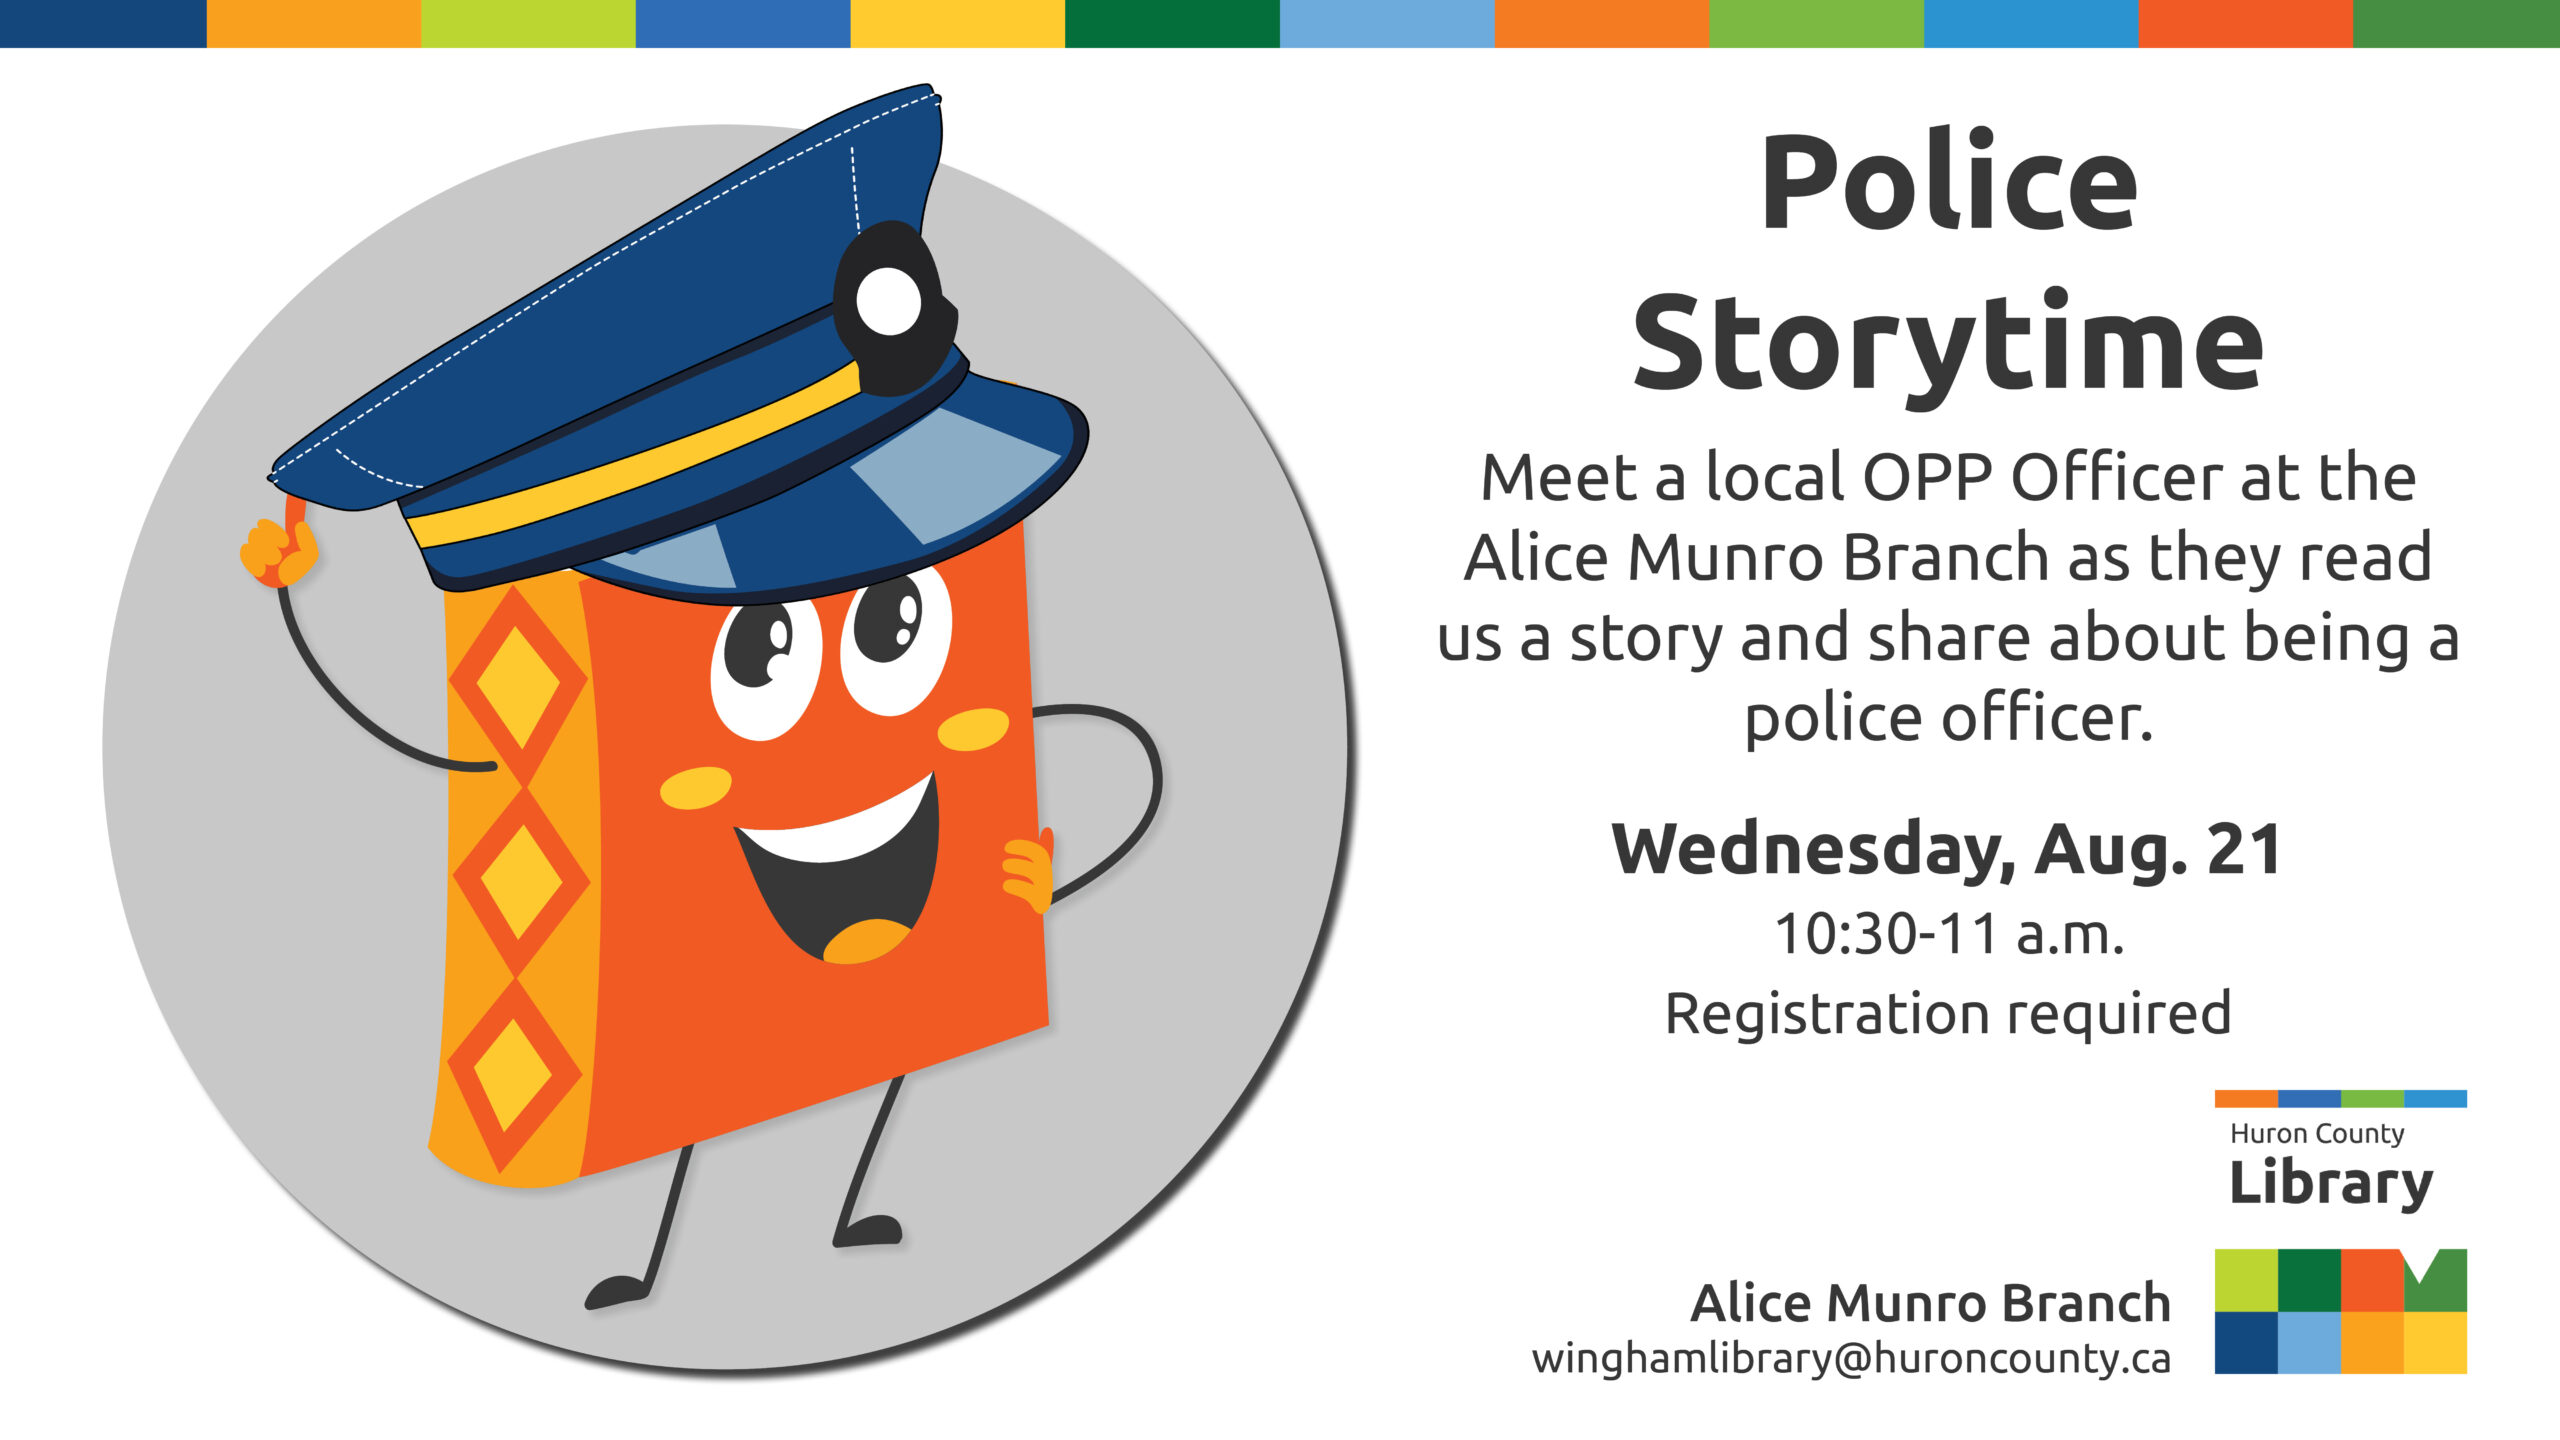 Illustration of Bob the Book wearing a police hat with text promoting police storytime at Wingham